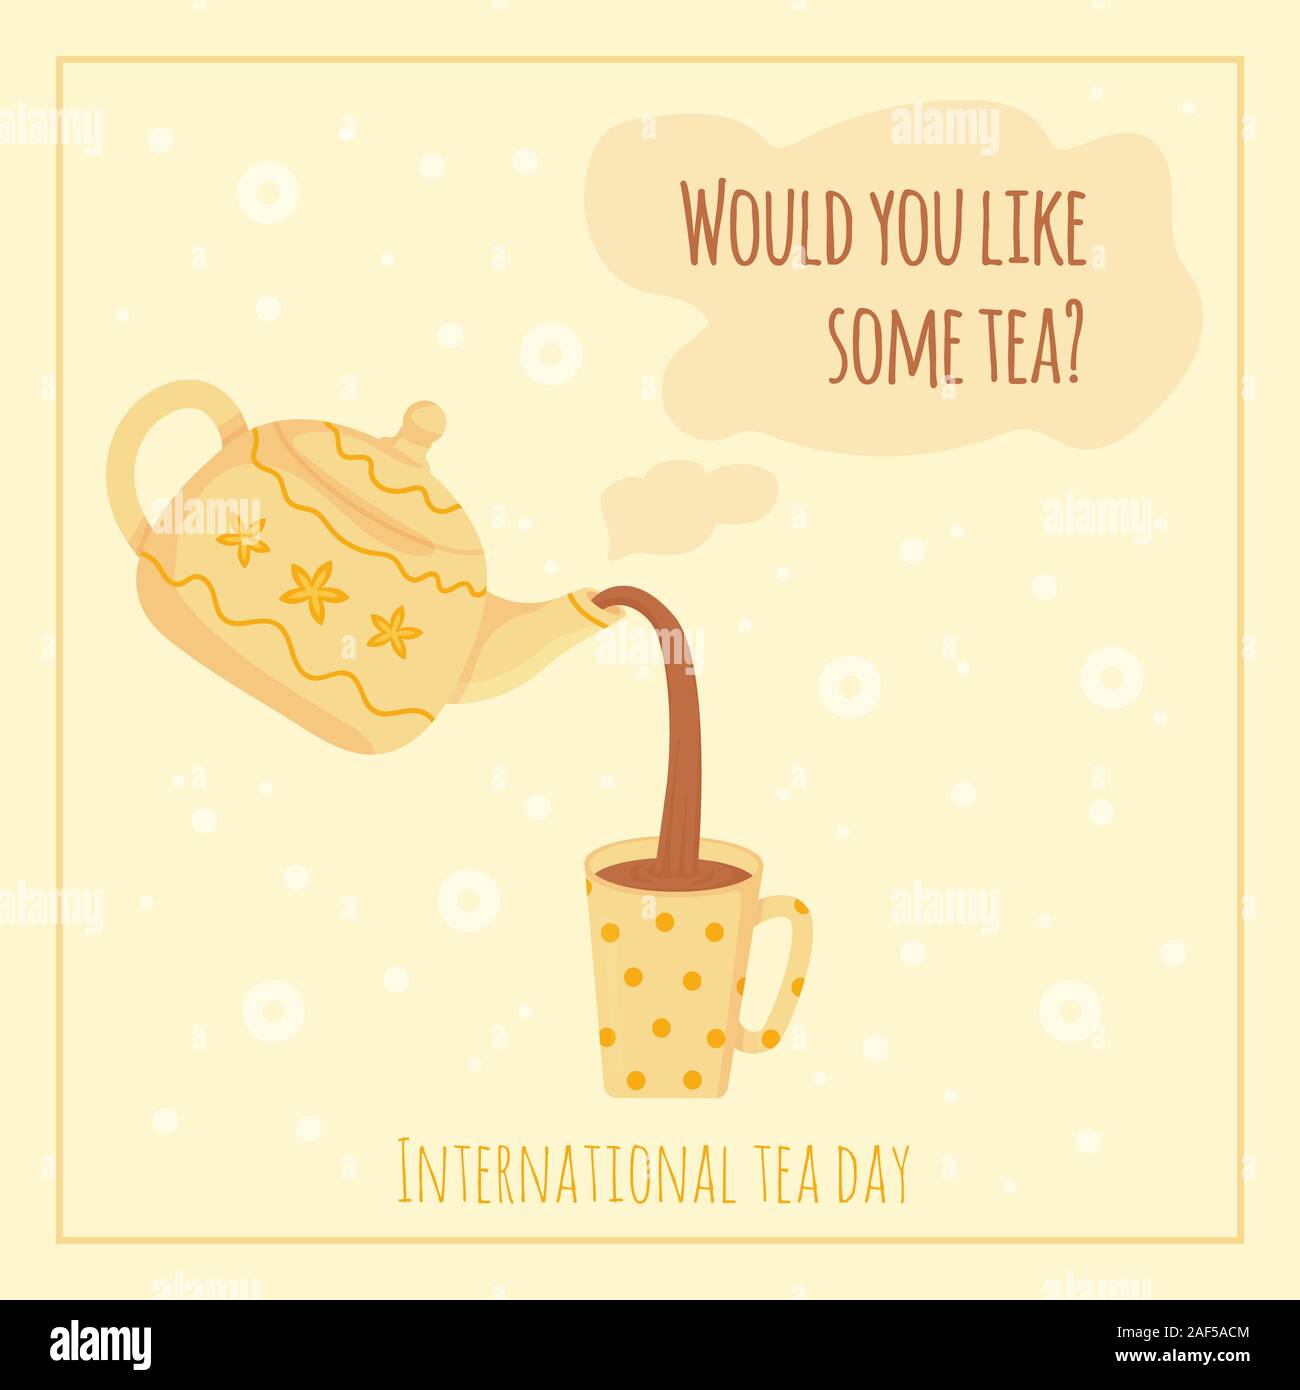 Cozy International Tea Day card, December 15. Pouring aromatic tea from painted kettle. World tea holiday concept. Would you like some tea postcard Stock Vector